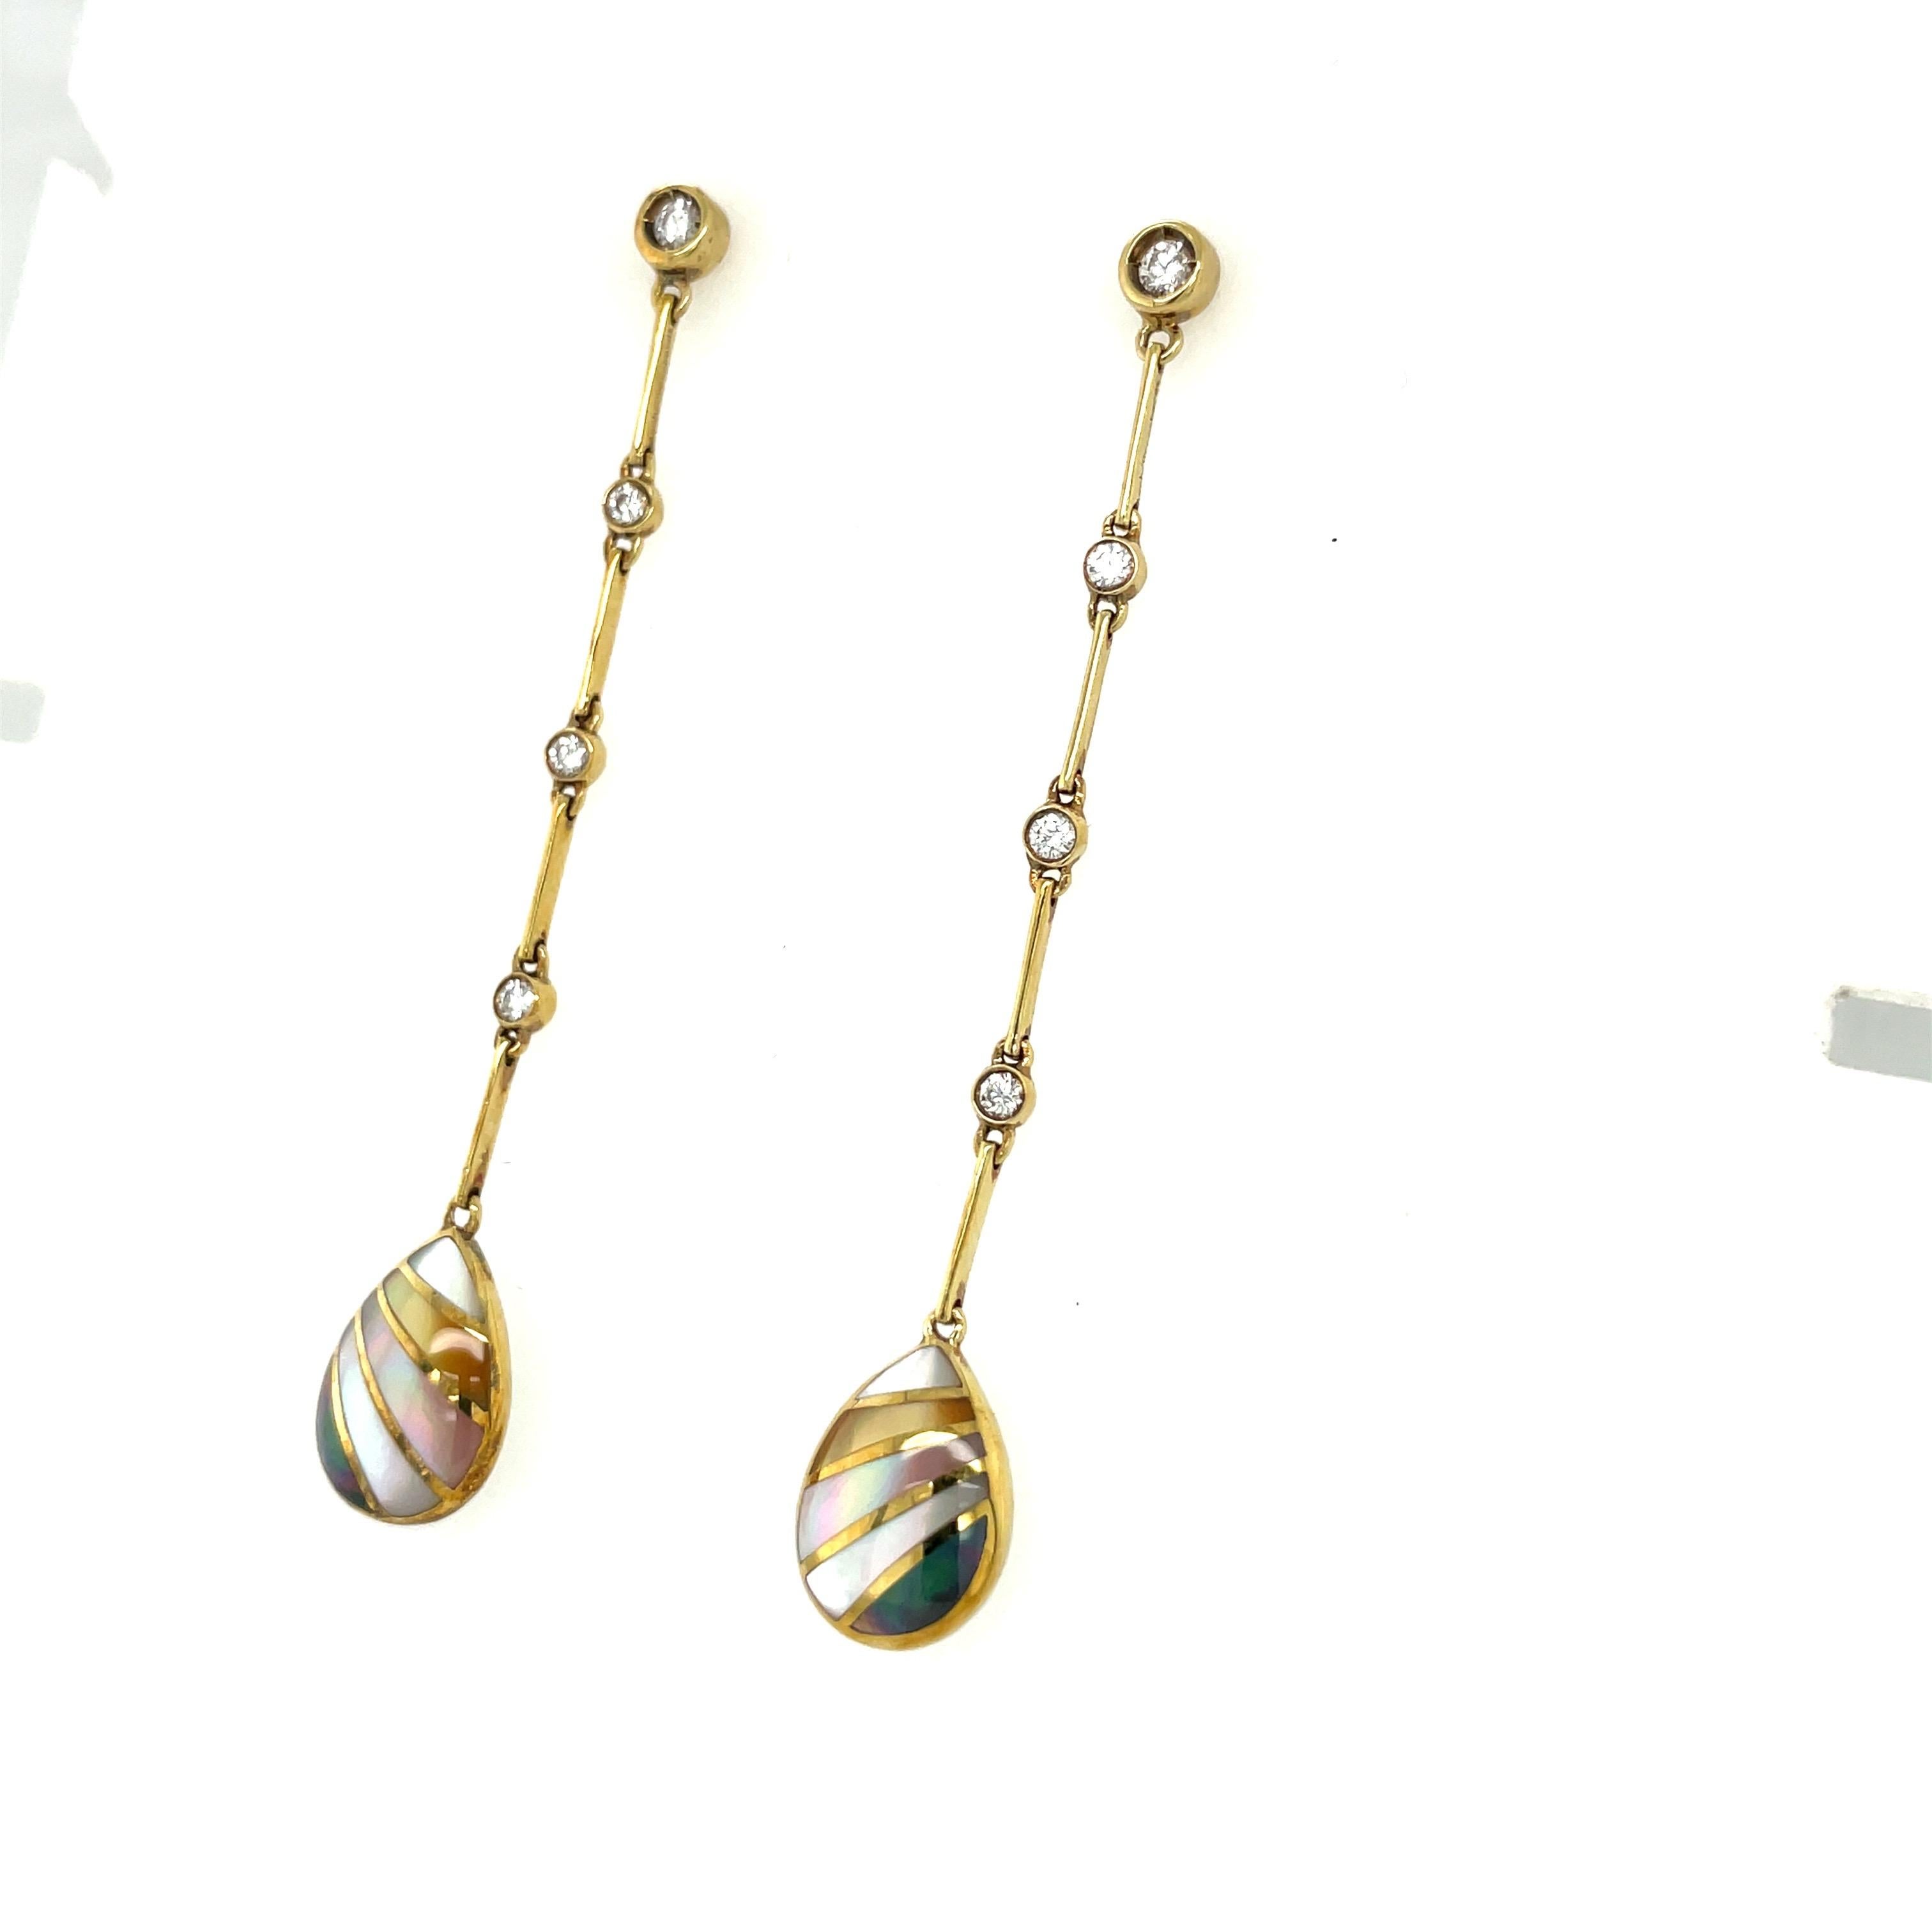 These 18 karat yellow gold hanging earrings were designed by Asch Grossbardt.  The earrings are crafted with 4 thin gold bars, joined with 4 bezel set round diamonds. A pear shaped drop of inlaid mother of pearl , in different shades, dangles at the